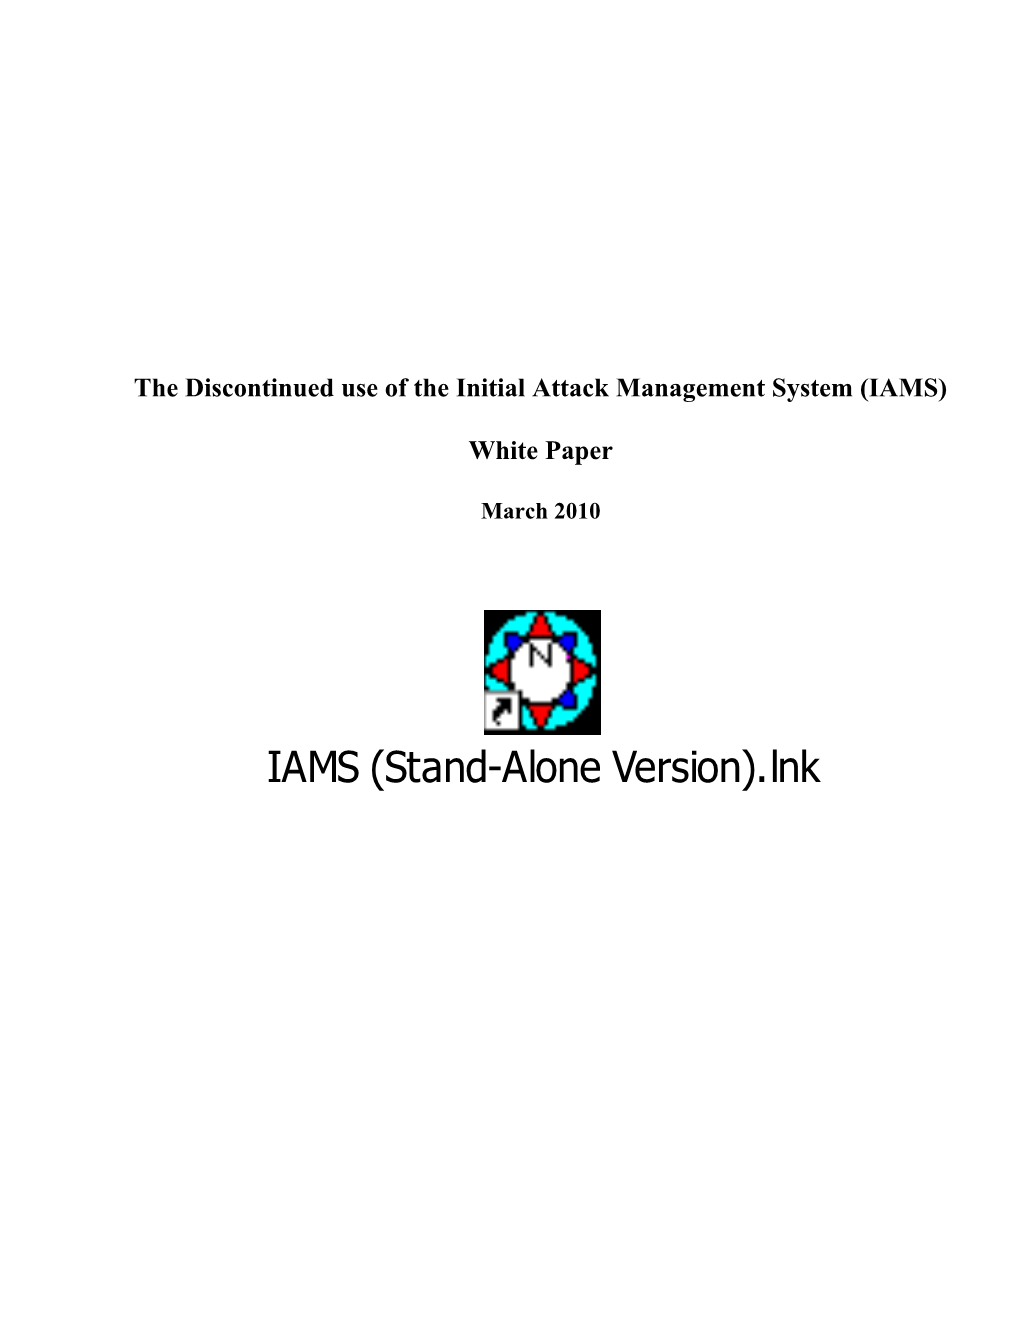 The Discontinued Use of the Initial Attack Management System (IAMS)